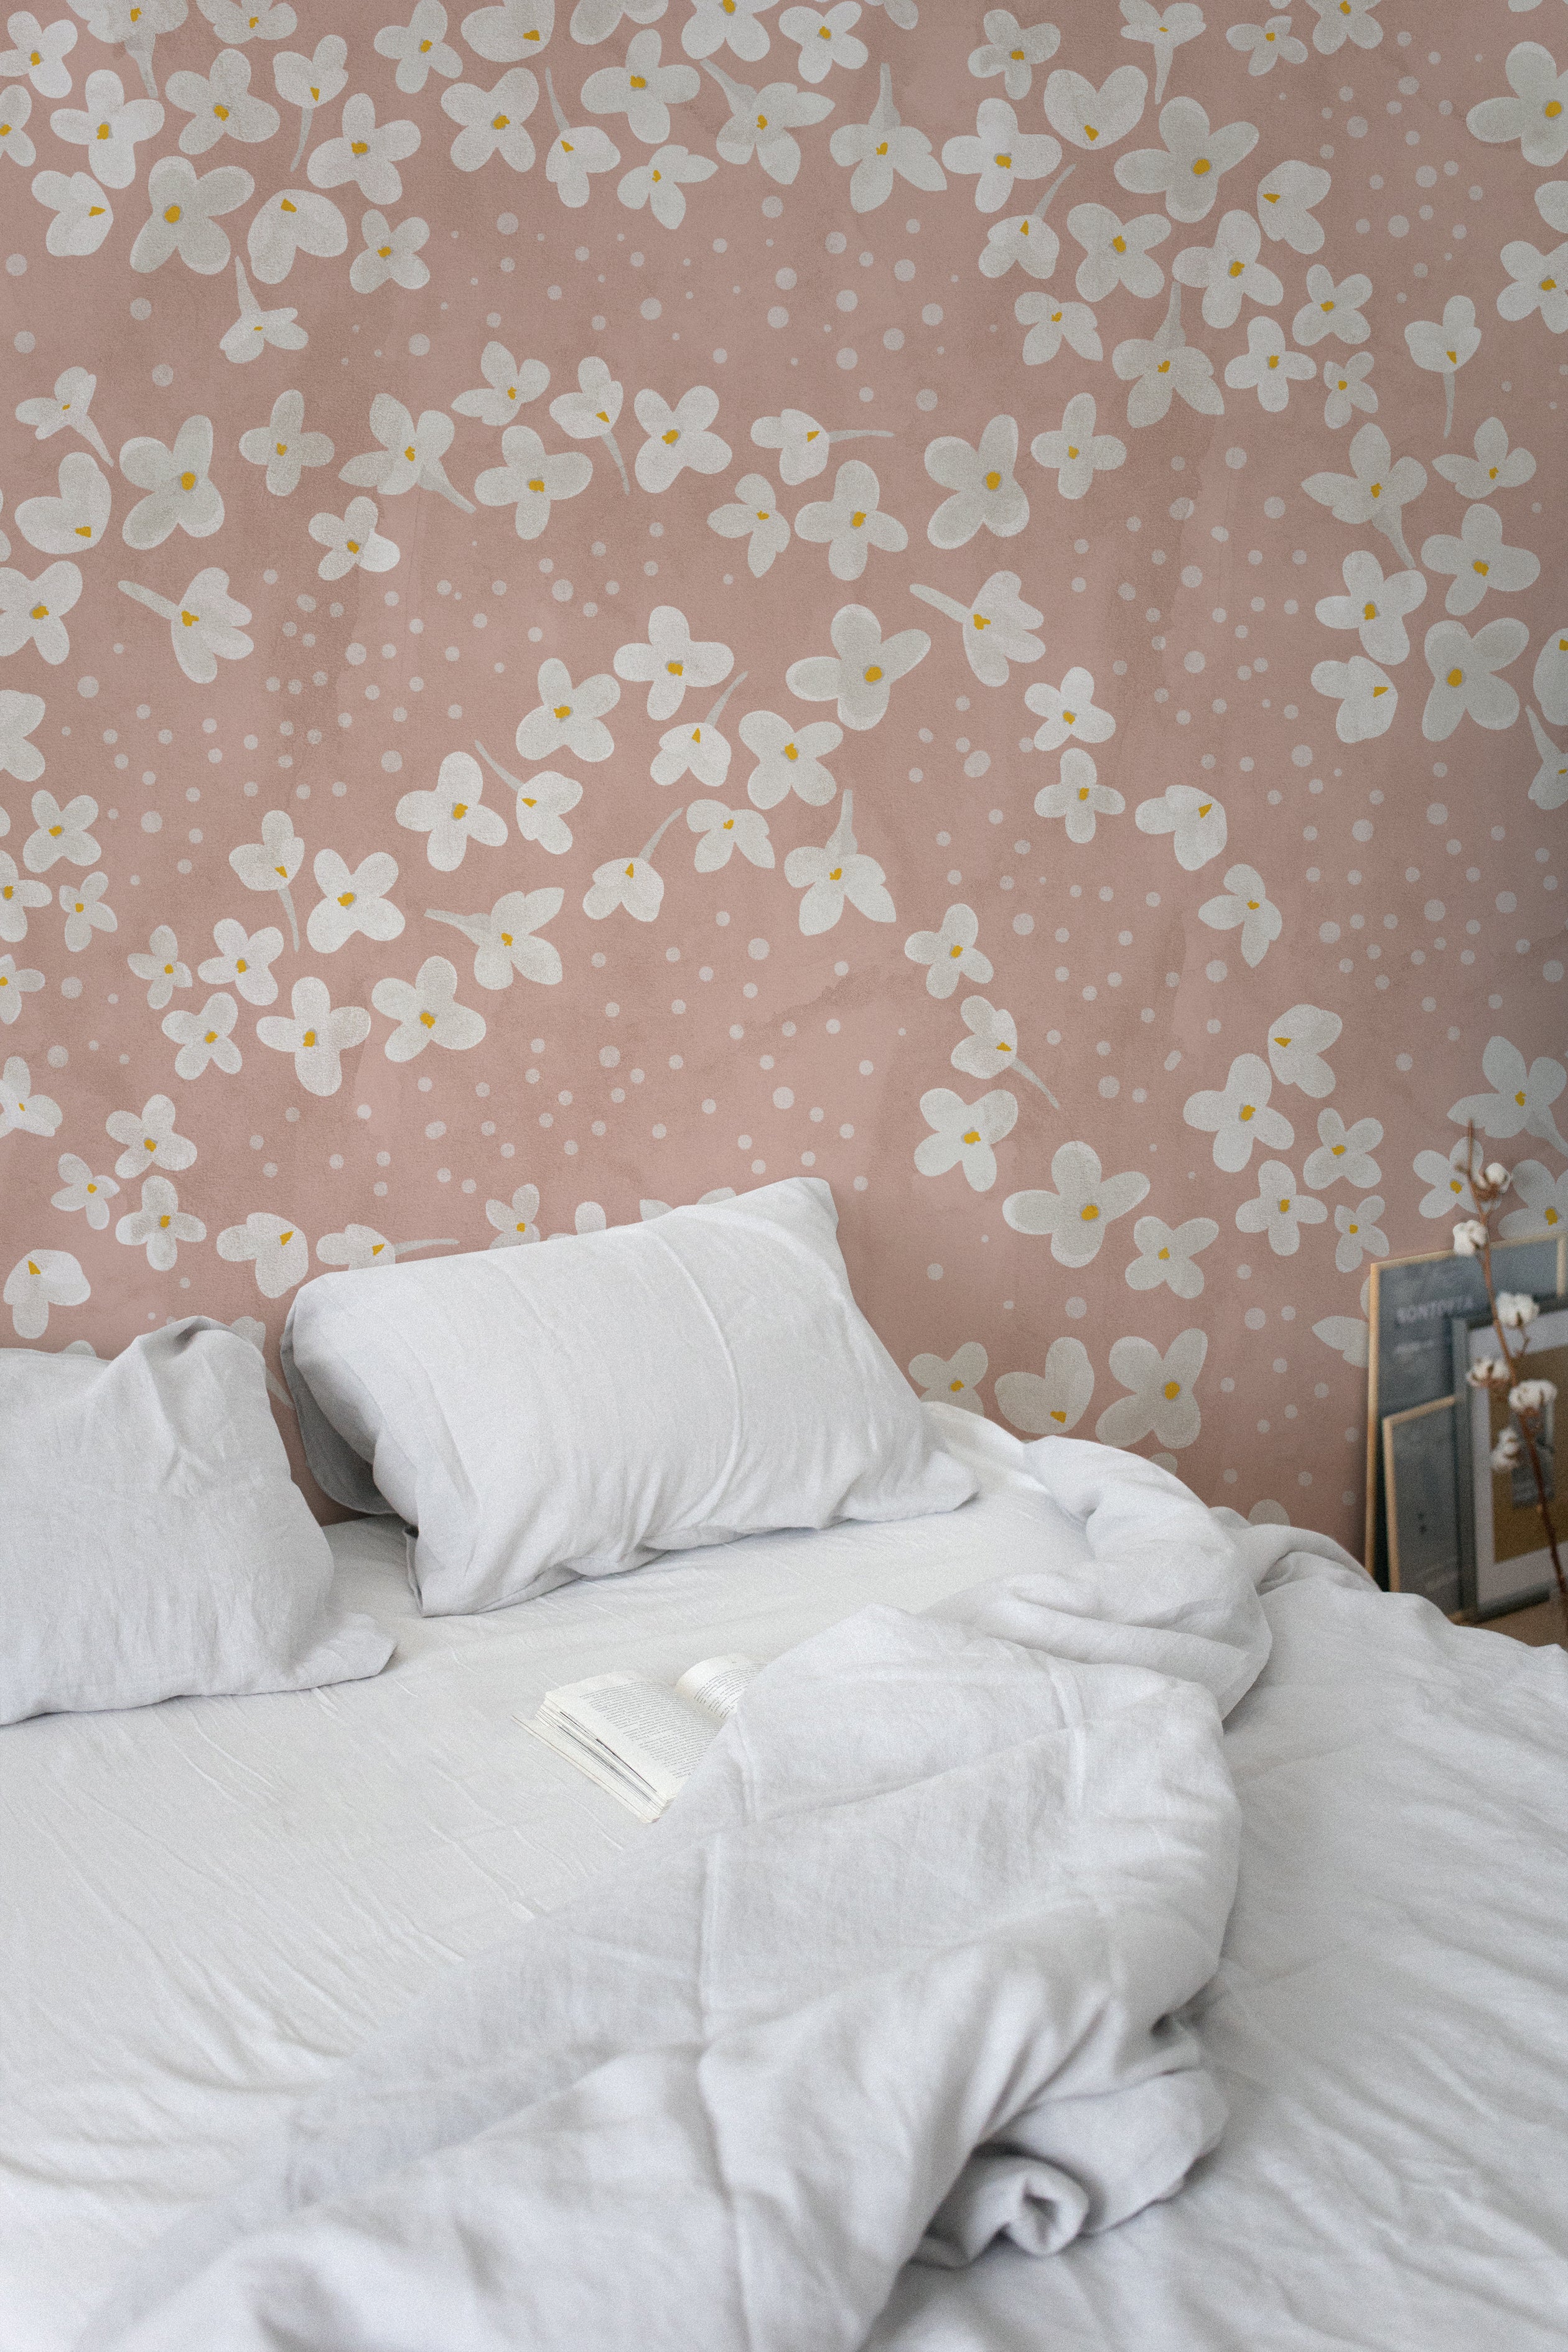 A cozy bedroom setup where the Fleur de Printemps Wallpaper provides a calm and soothing backdrop with its white flowers and subtle polka dots over a pastel pink background.